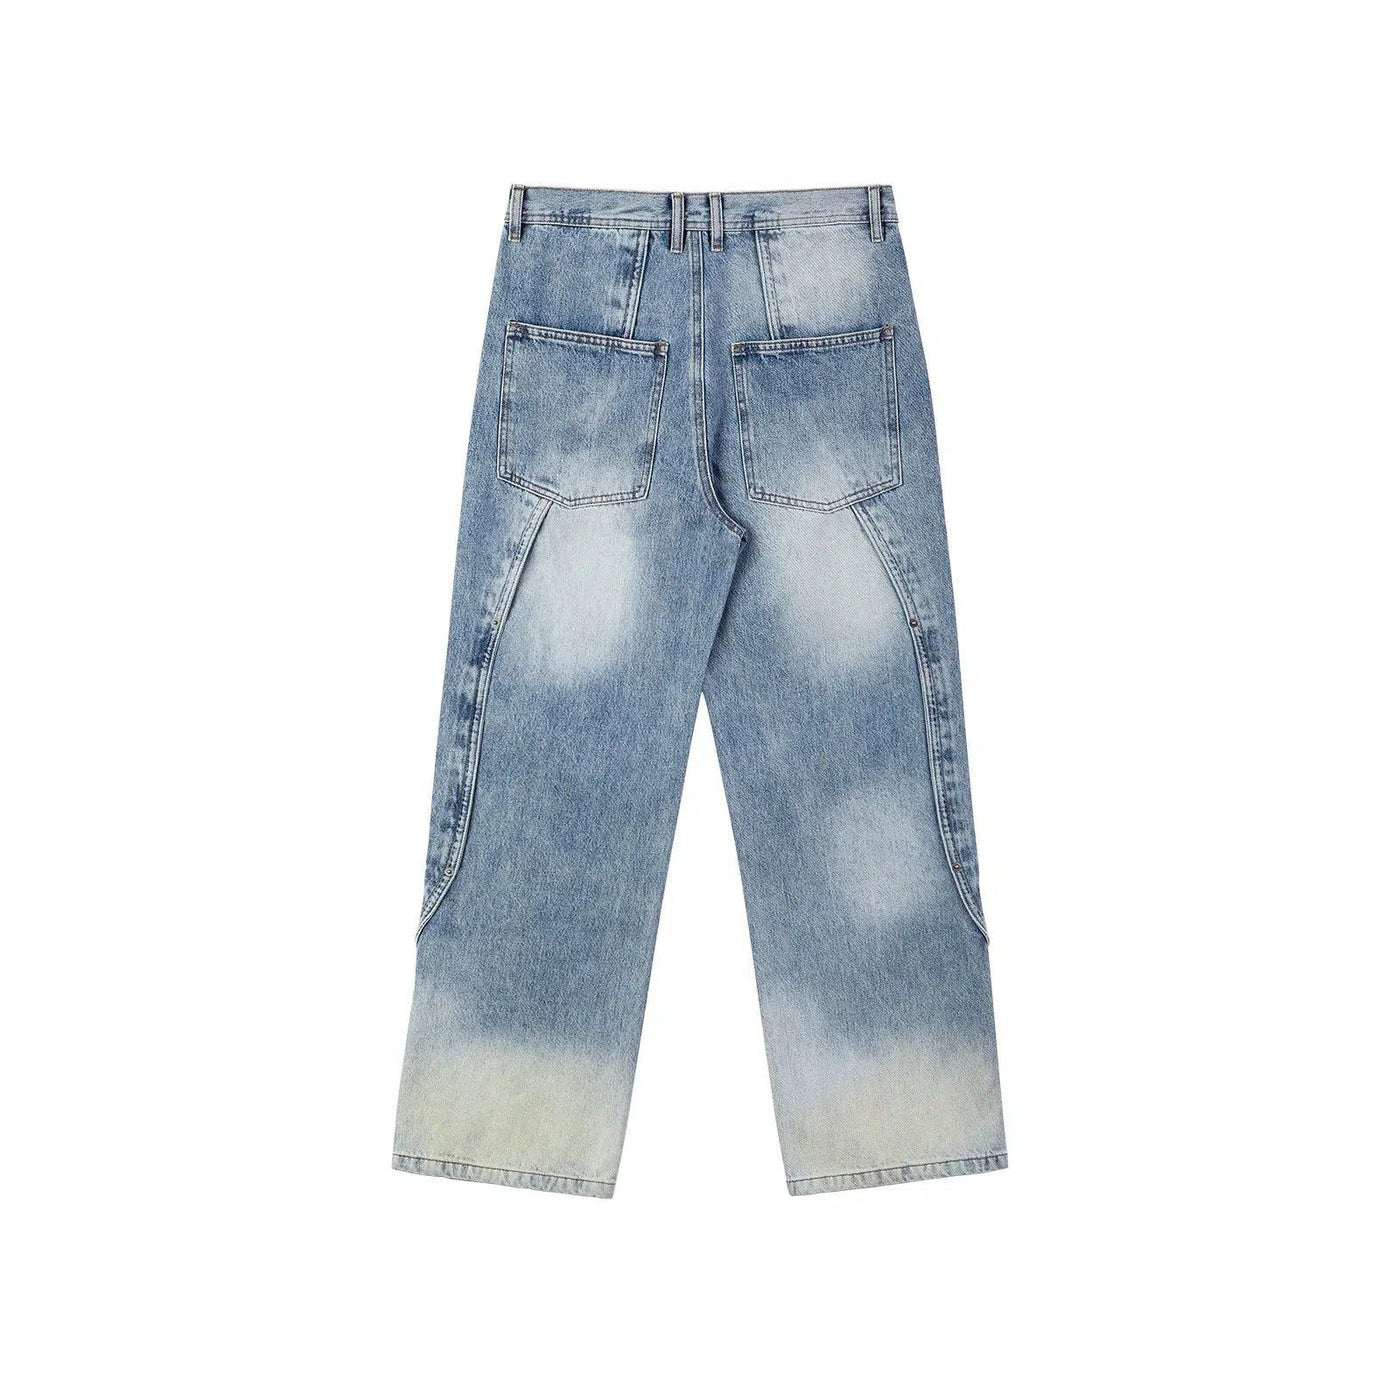 Curve Seams Faded Jeans Korean Street Fashion Jeans By IDLT Shop Online at OH Vault